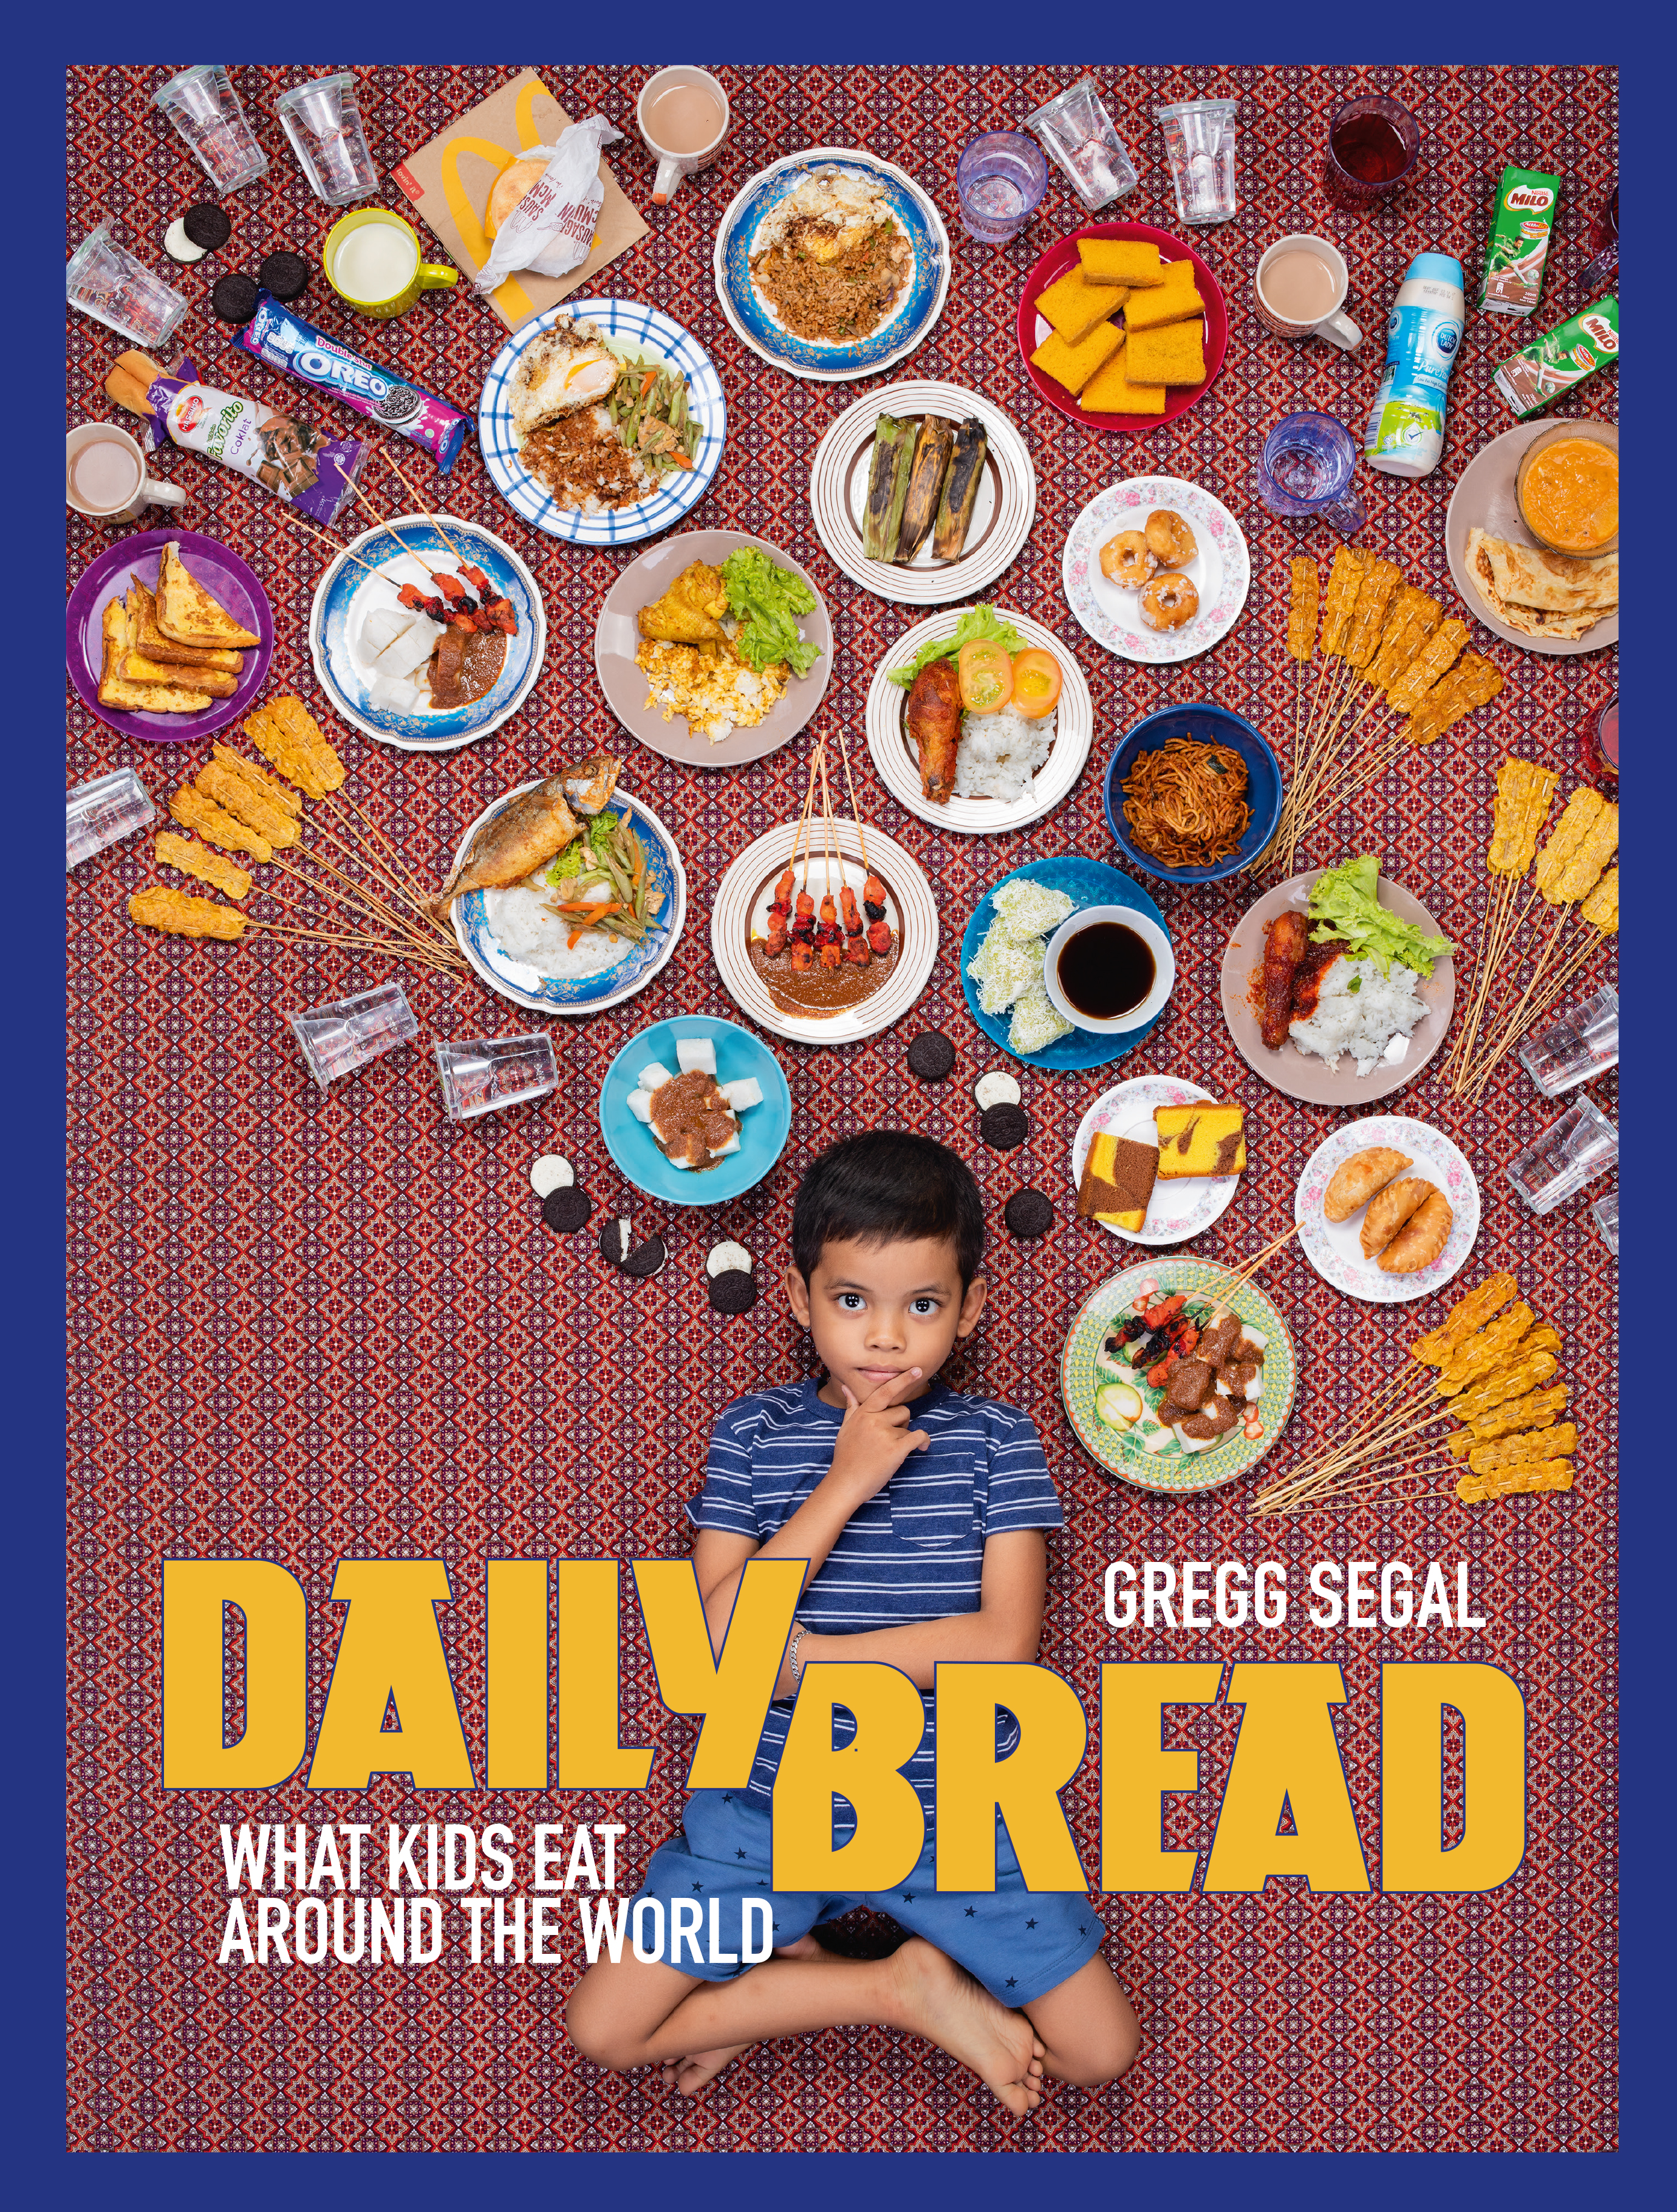 powerHouse Book Launch: Daily Bread by Gregg Segal